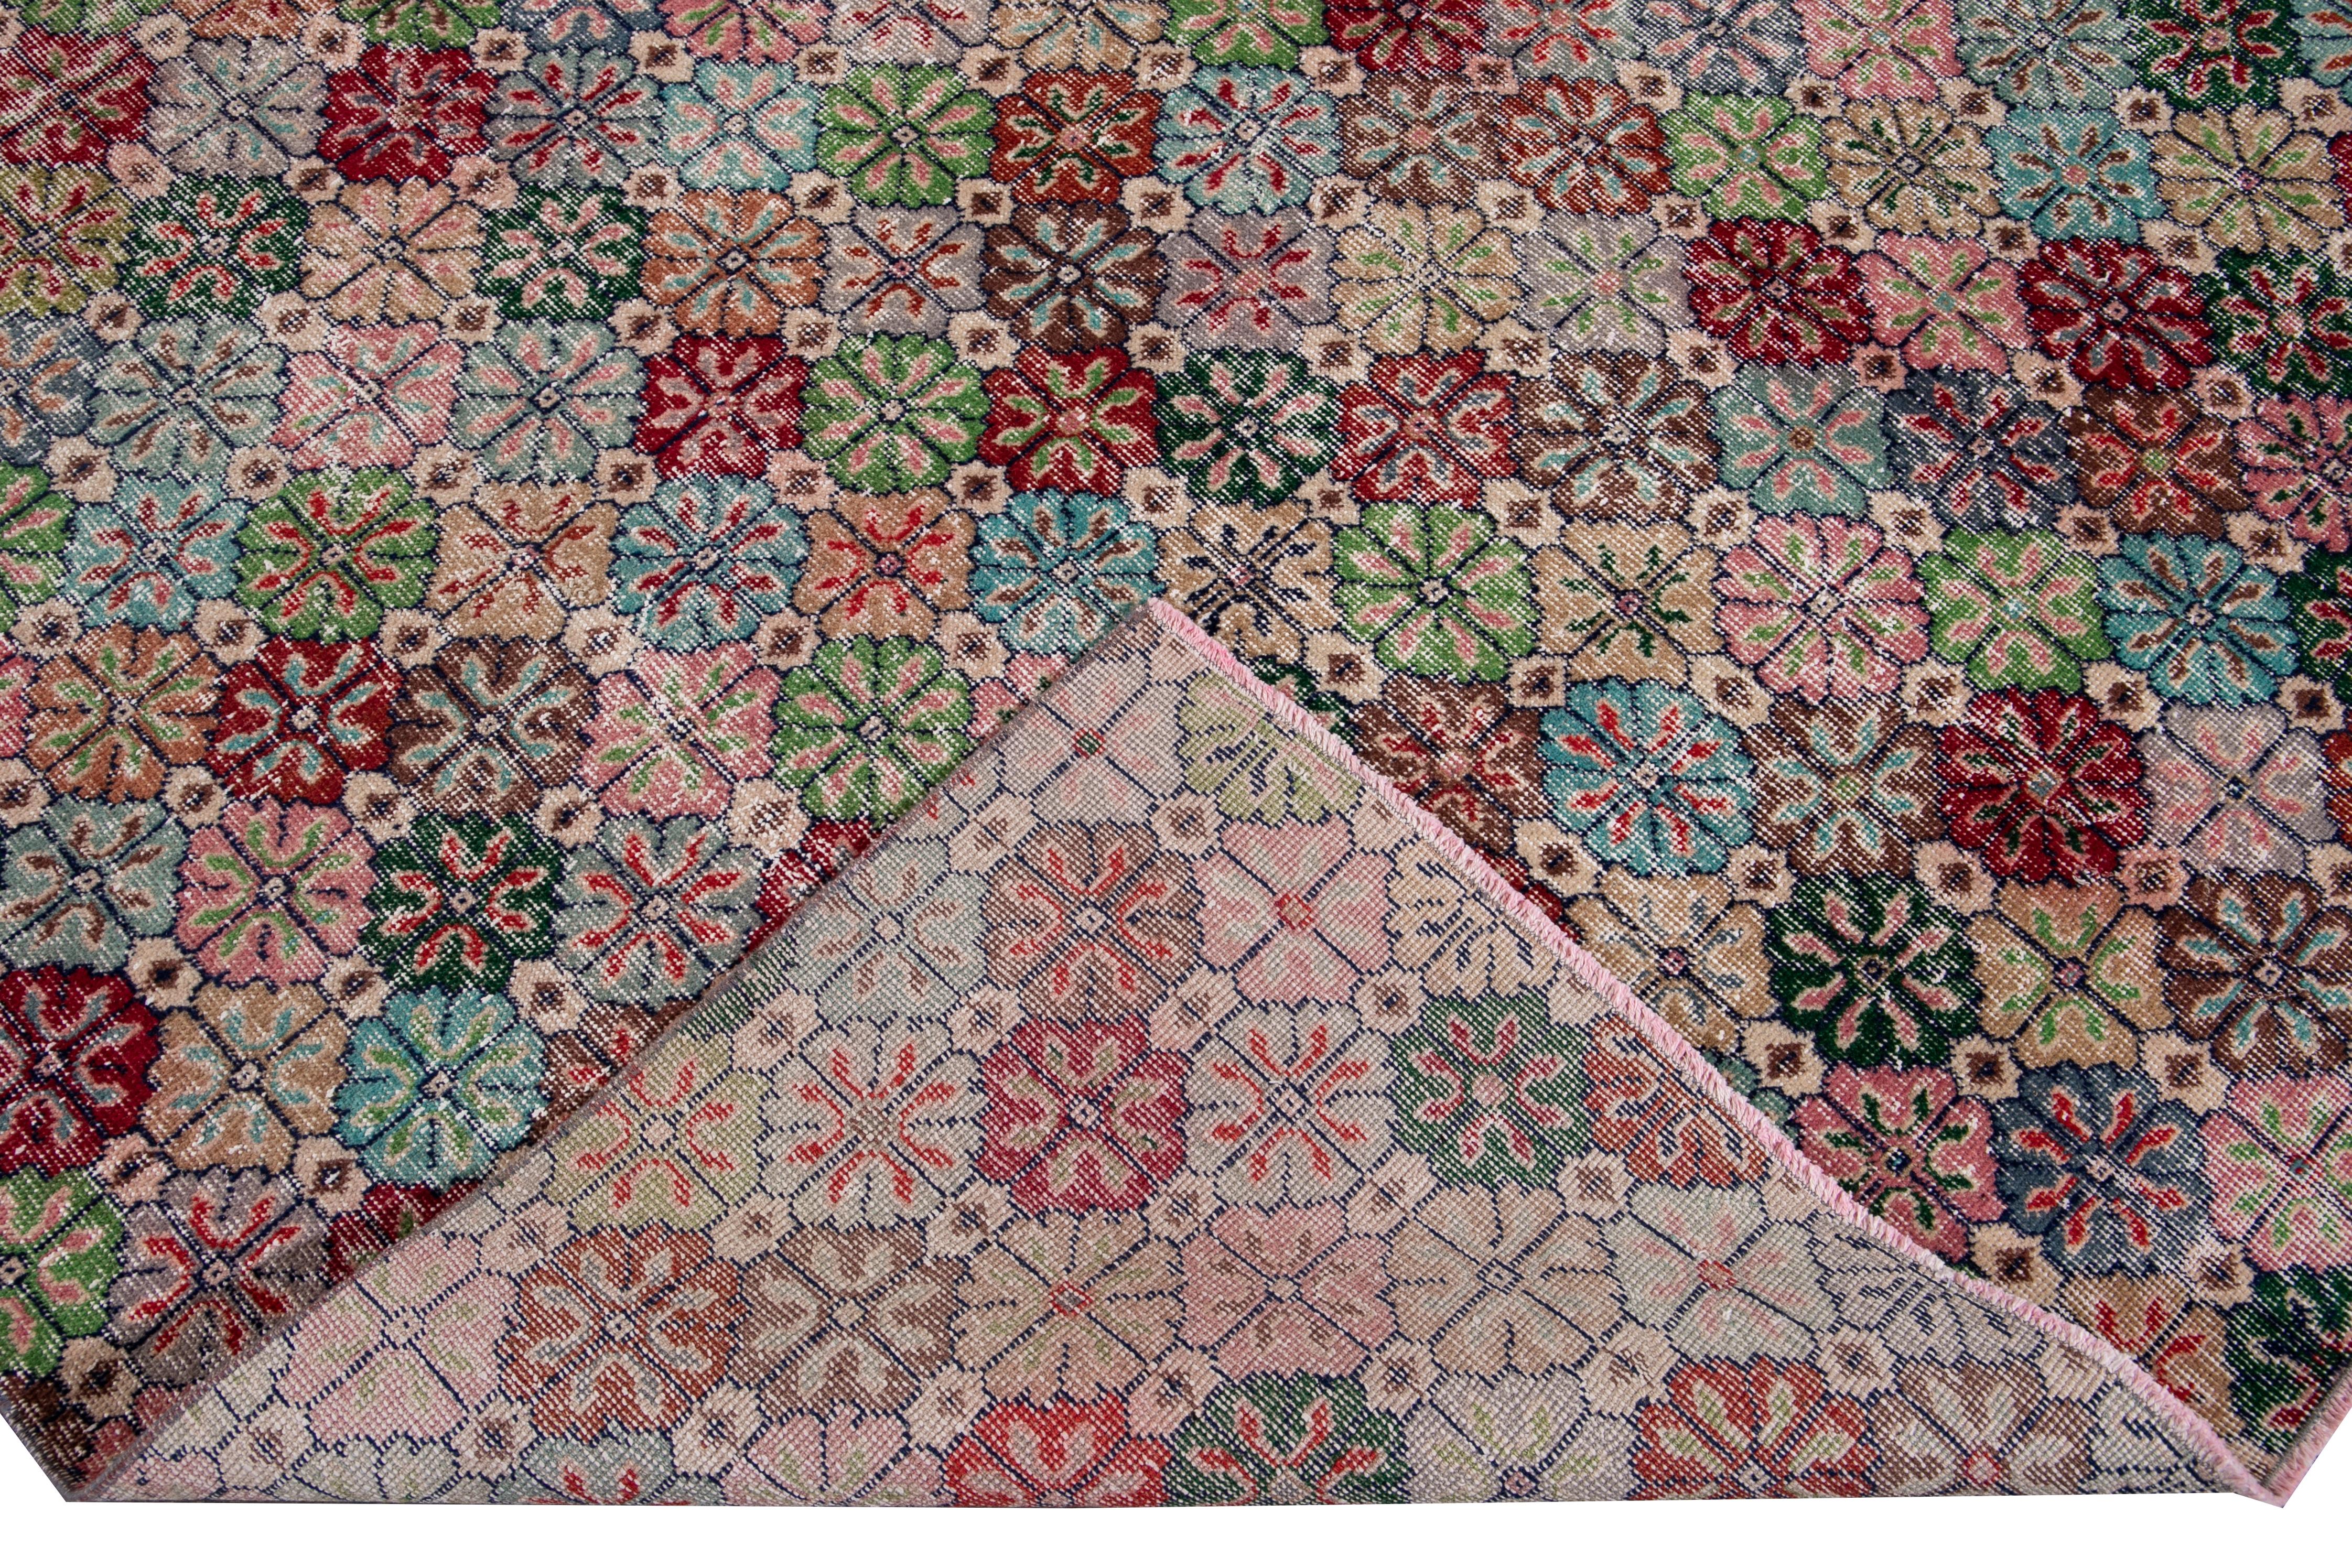 Beautiful vintage Turkish hand-knotted wool rug with a multi-color field. This Turkish rug has a gorgeous all-over geometric floral design.

This rug measures: 6' 10